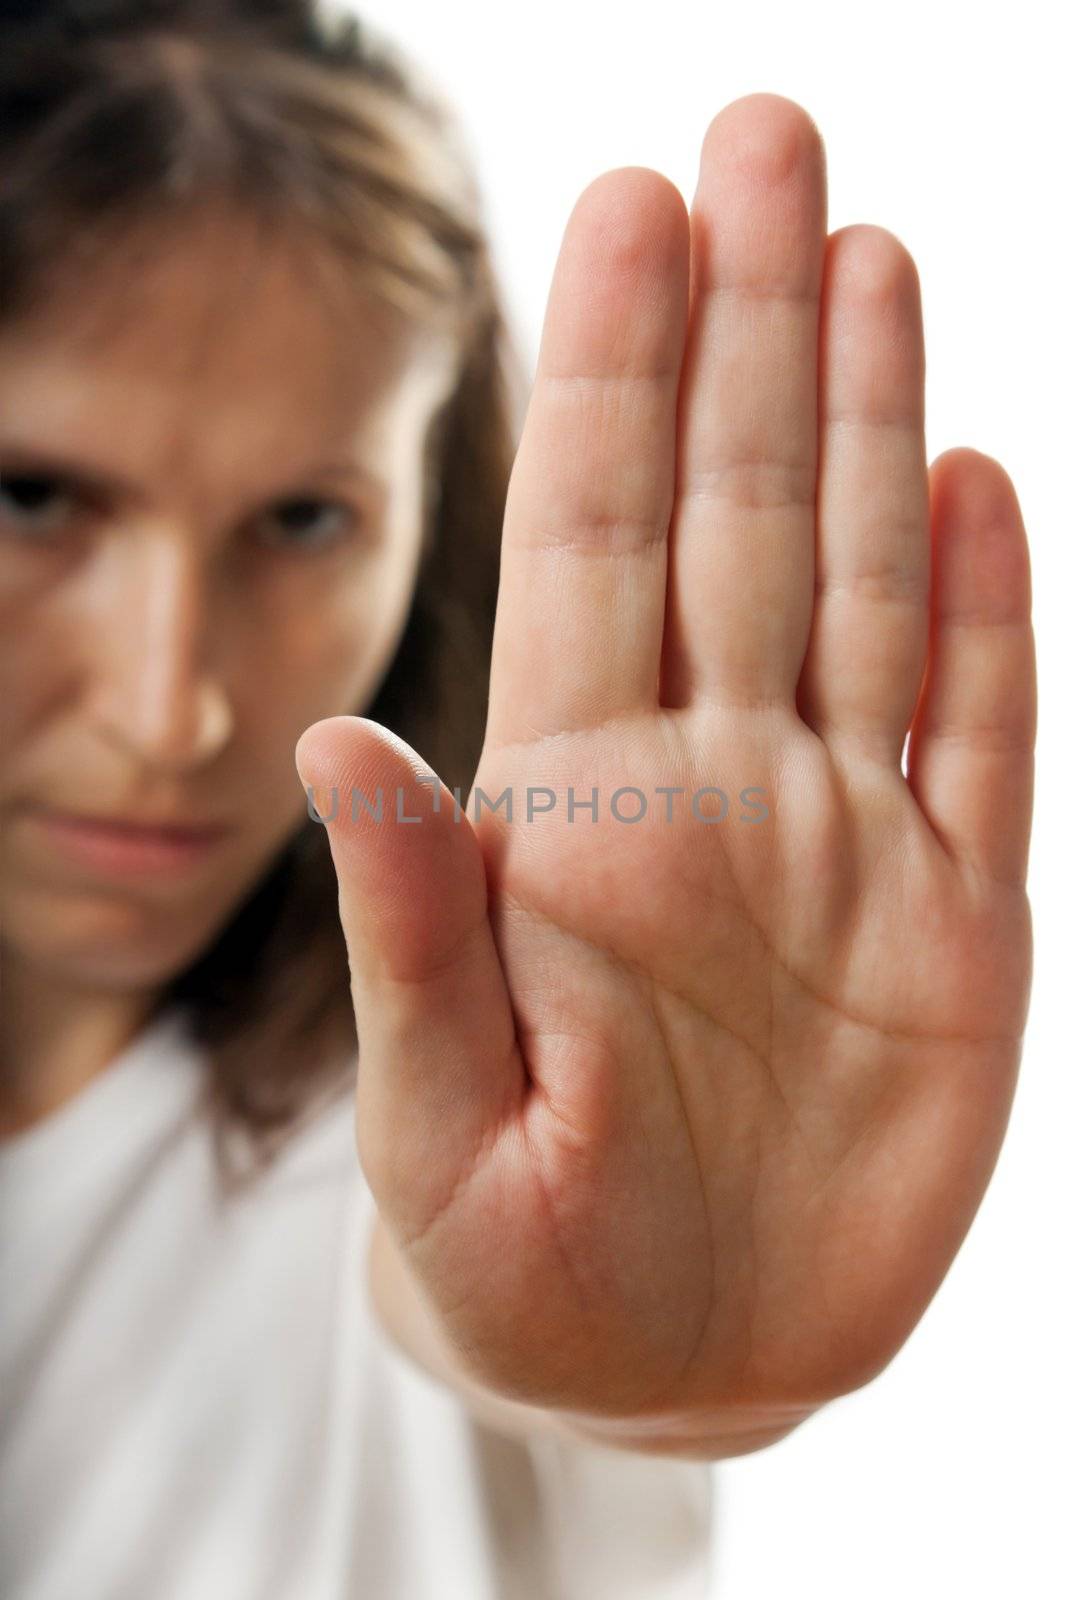 Adult shy women hand gesture stop sign hiding face